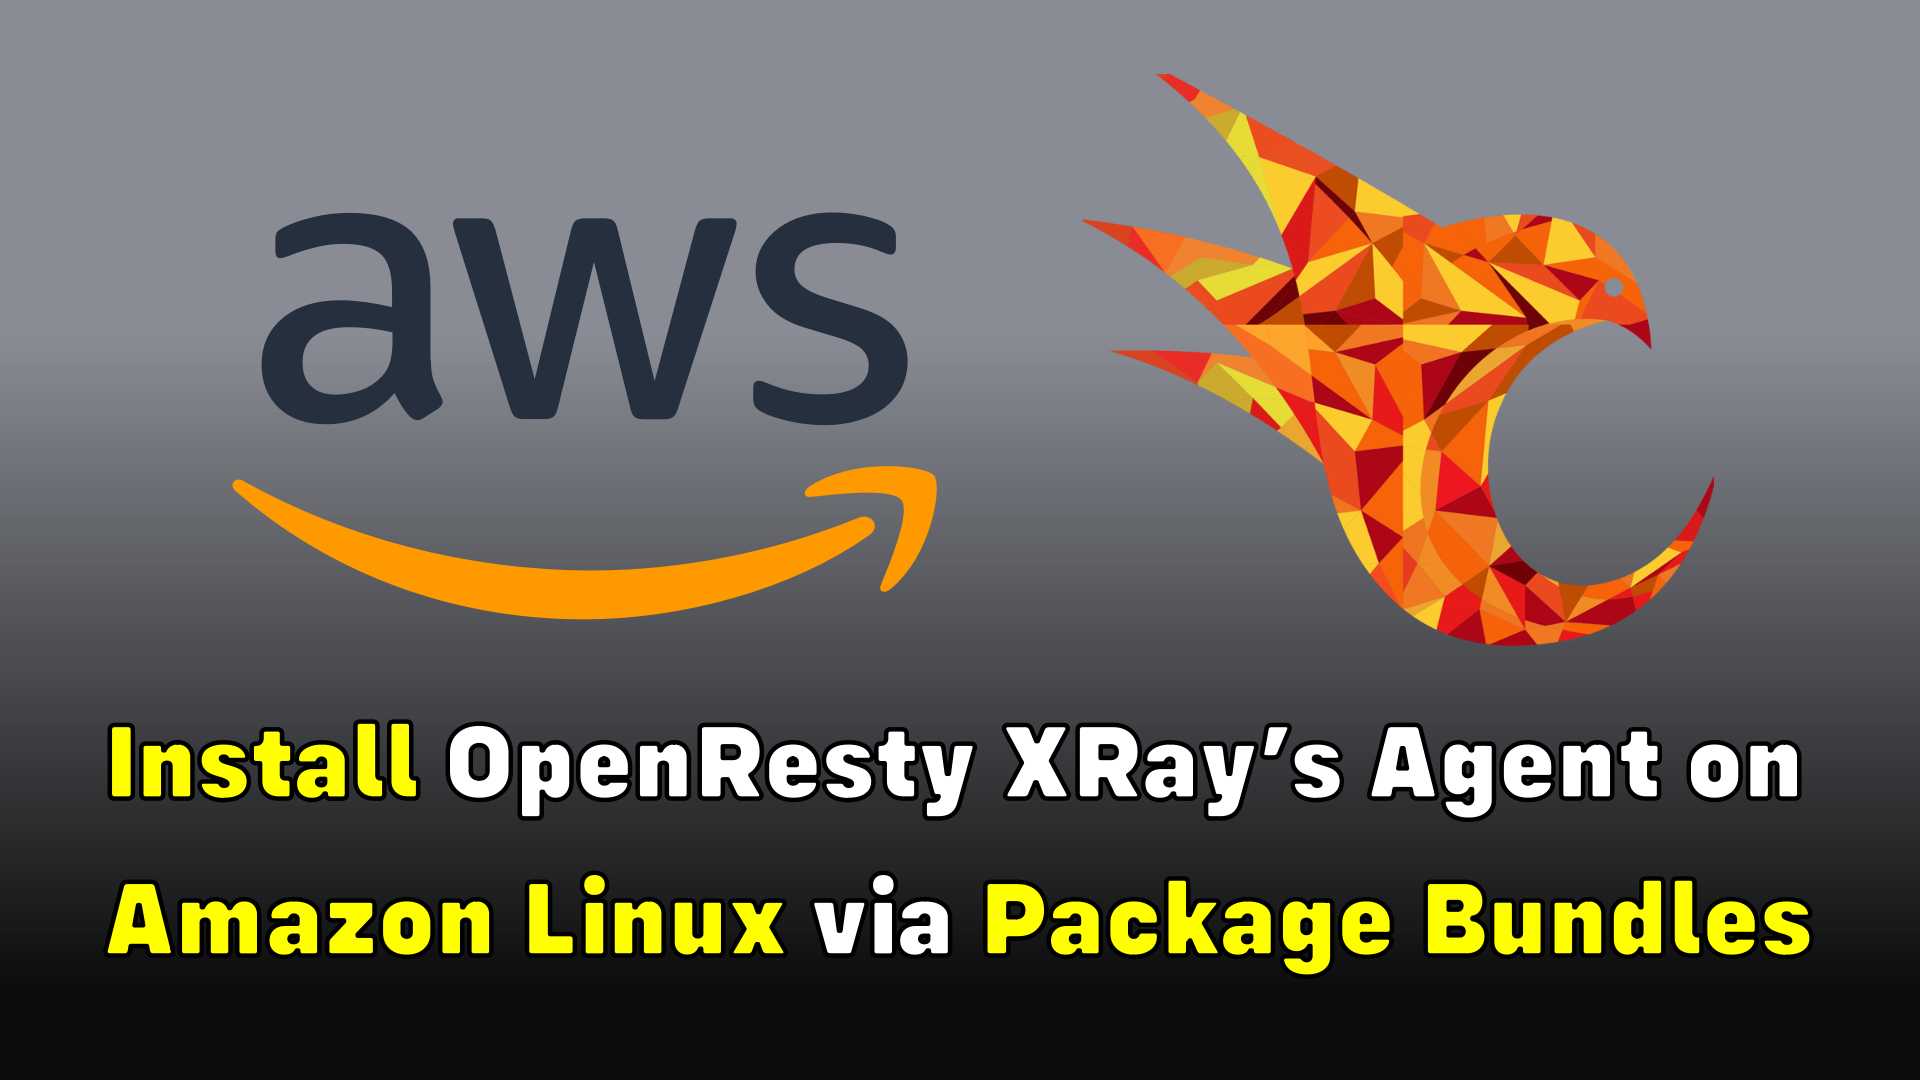 Install OpenResty XRay’s Agents on Amazon Linux via Package Bundles